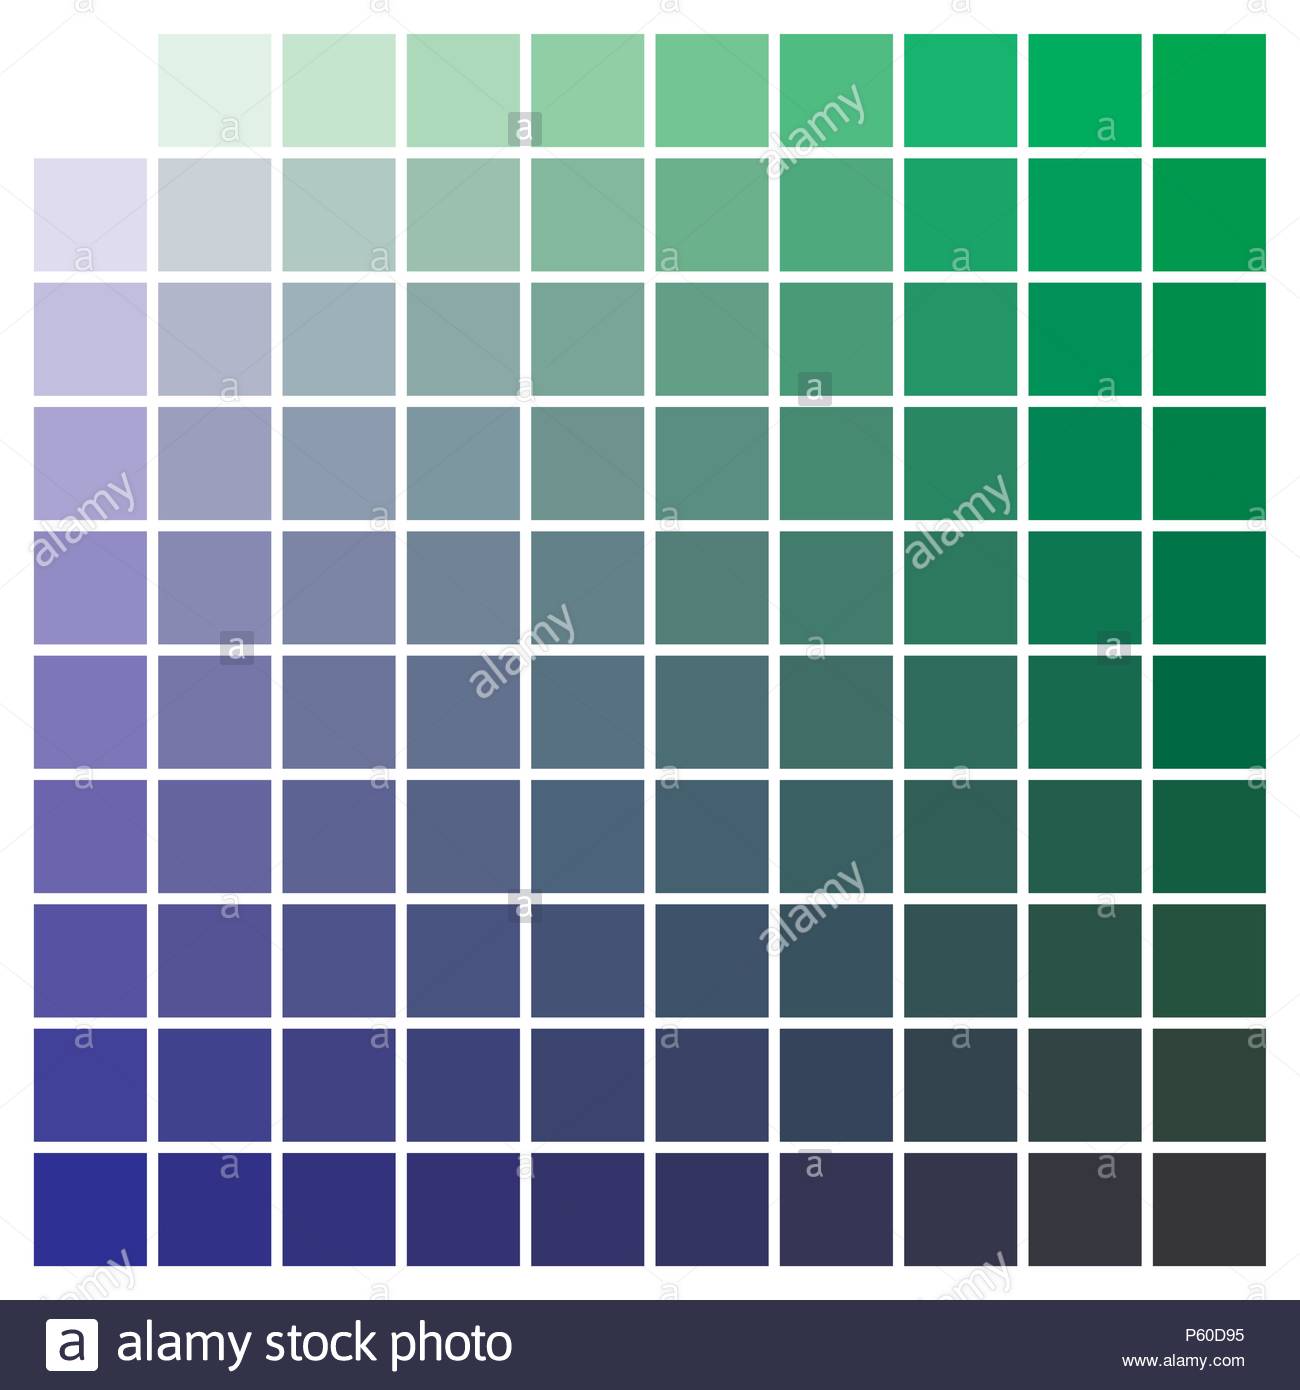 Teal Green Color Chart